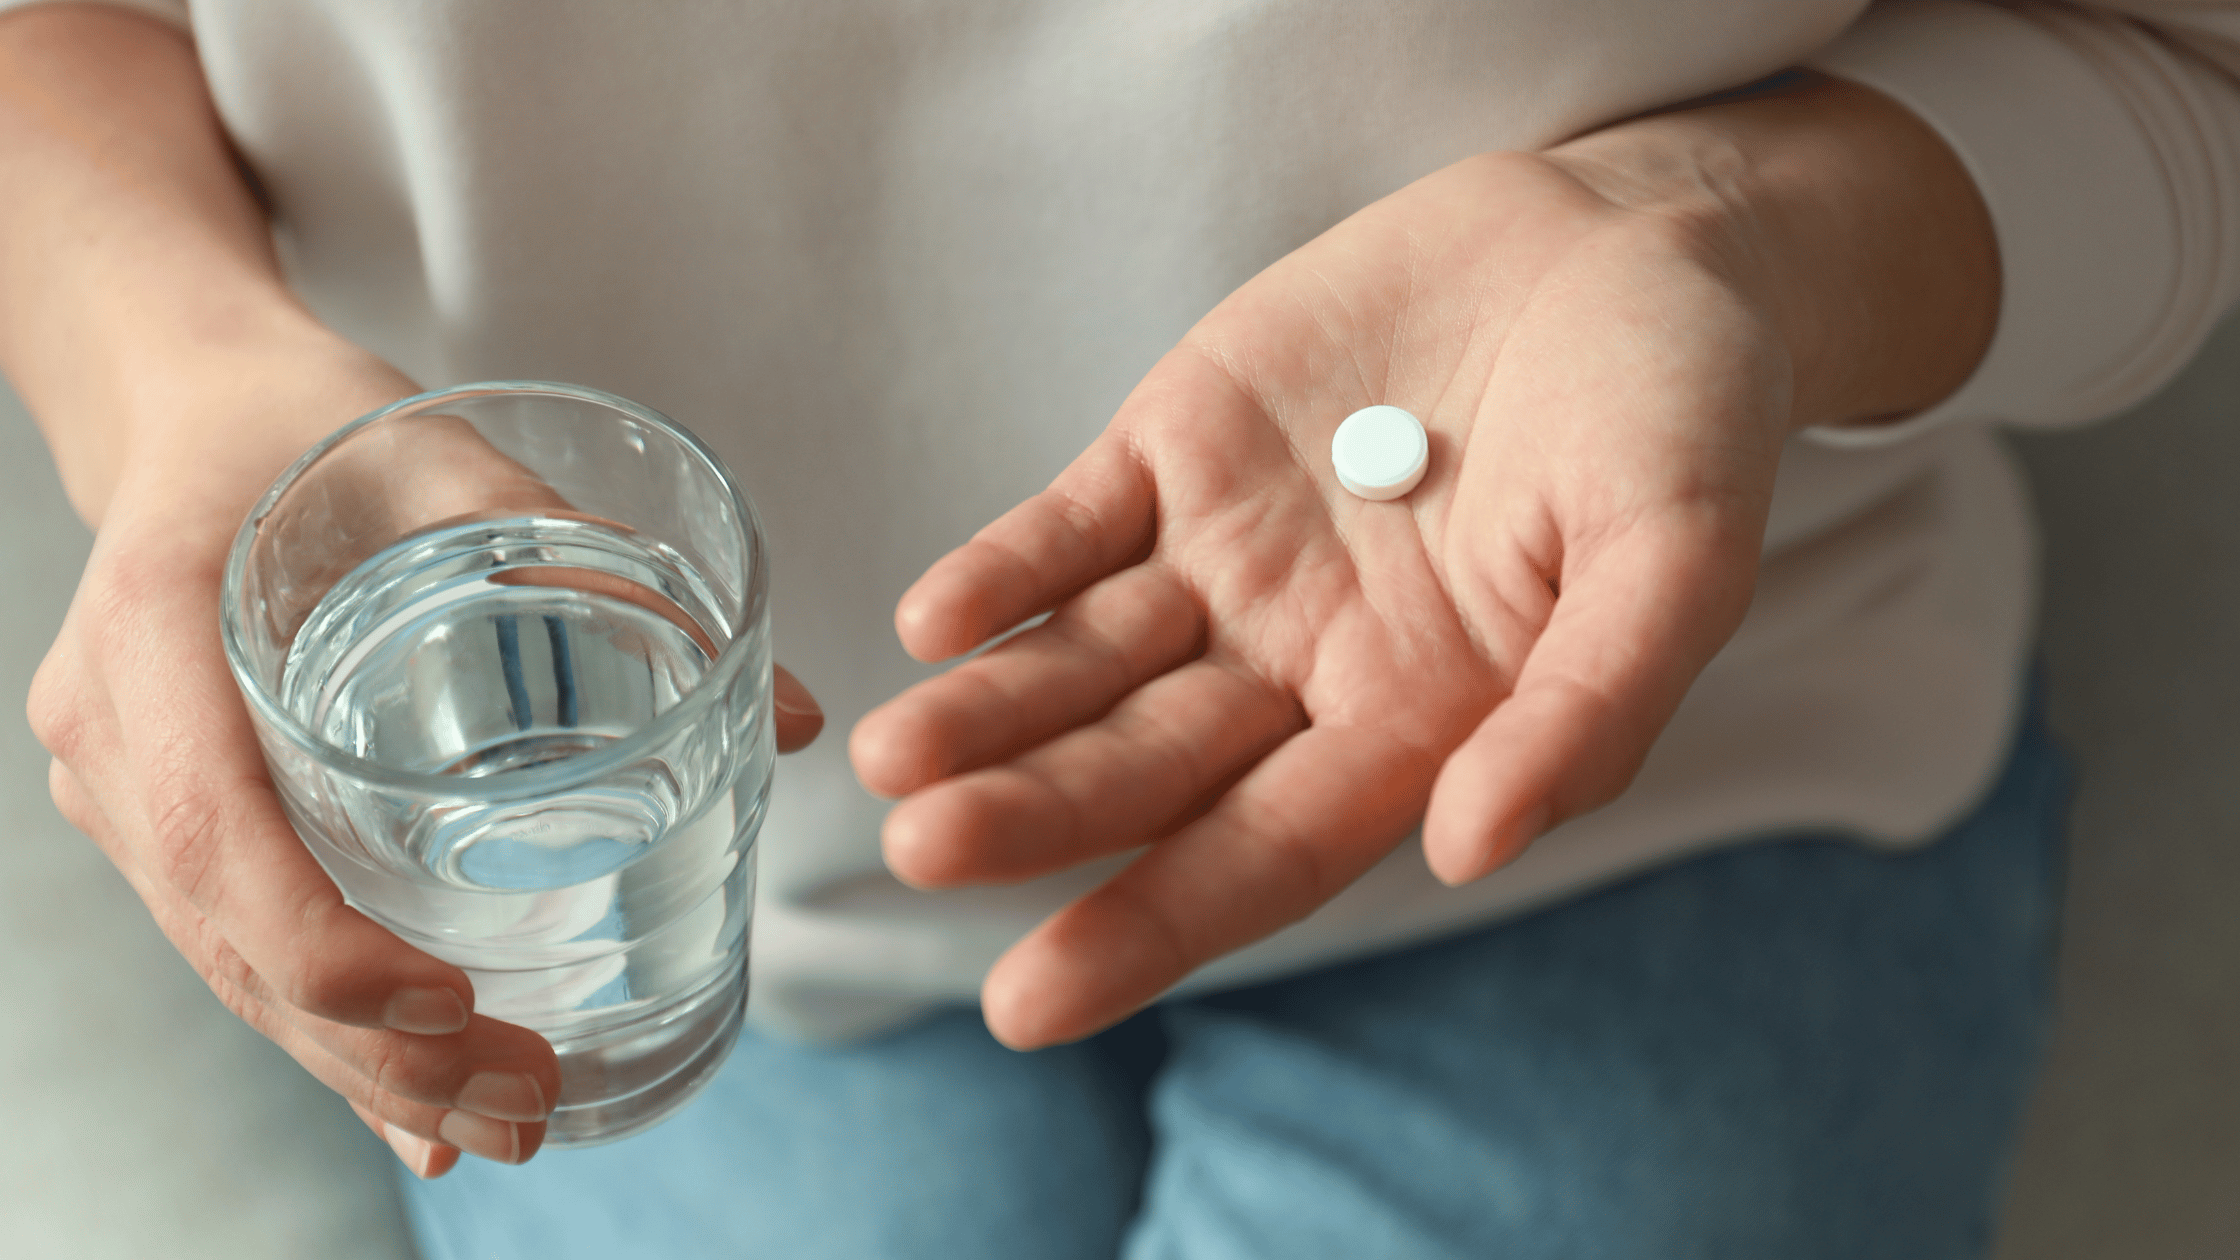 Salt Tablets for Runners Take The Place of Water